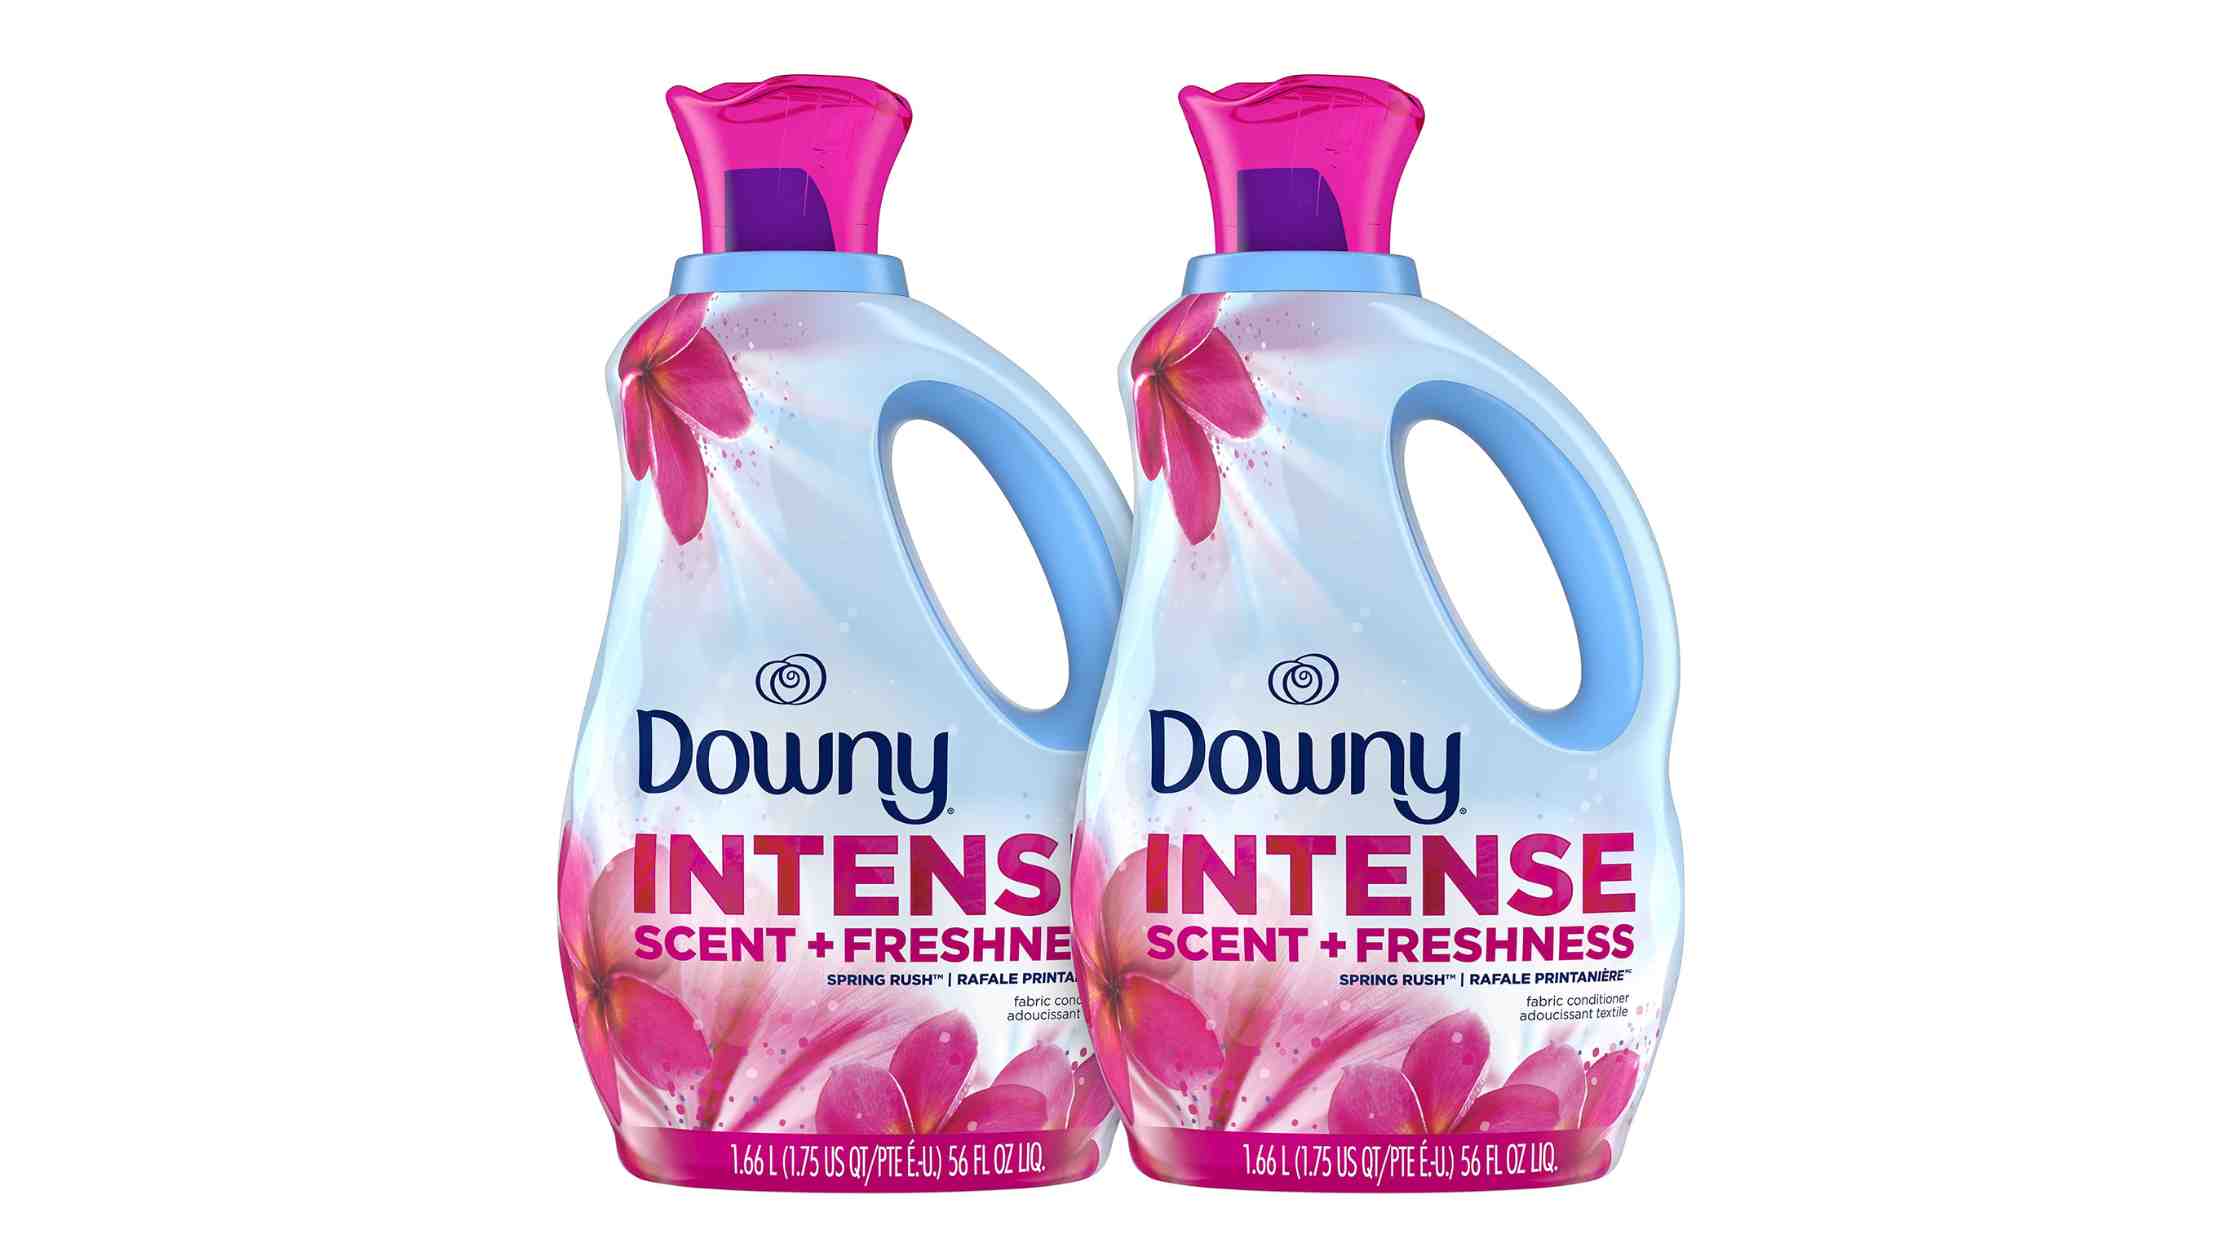 Downy Intense discontinued